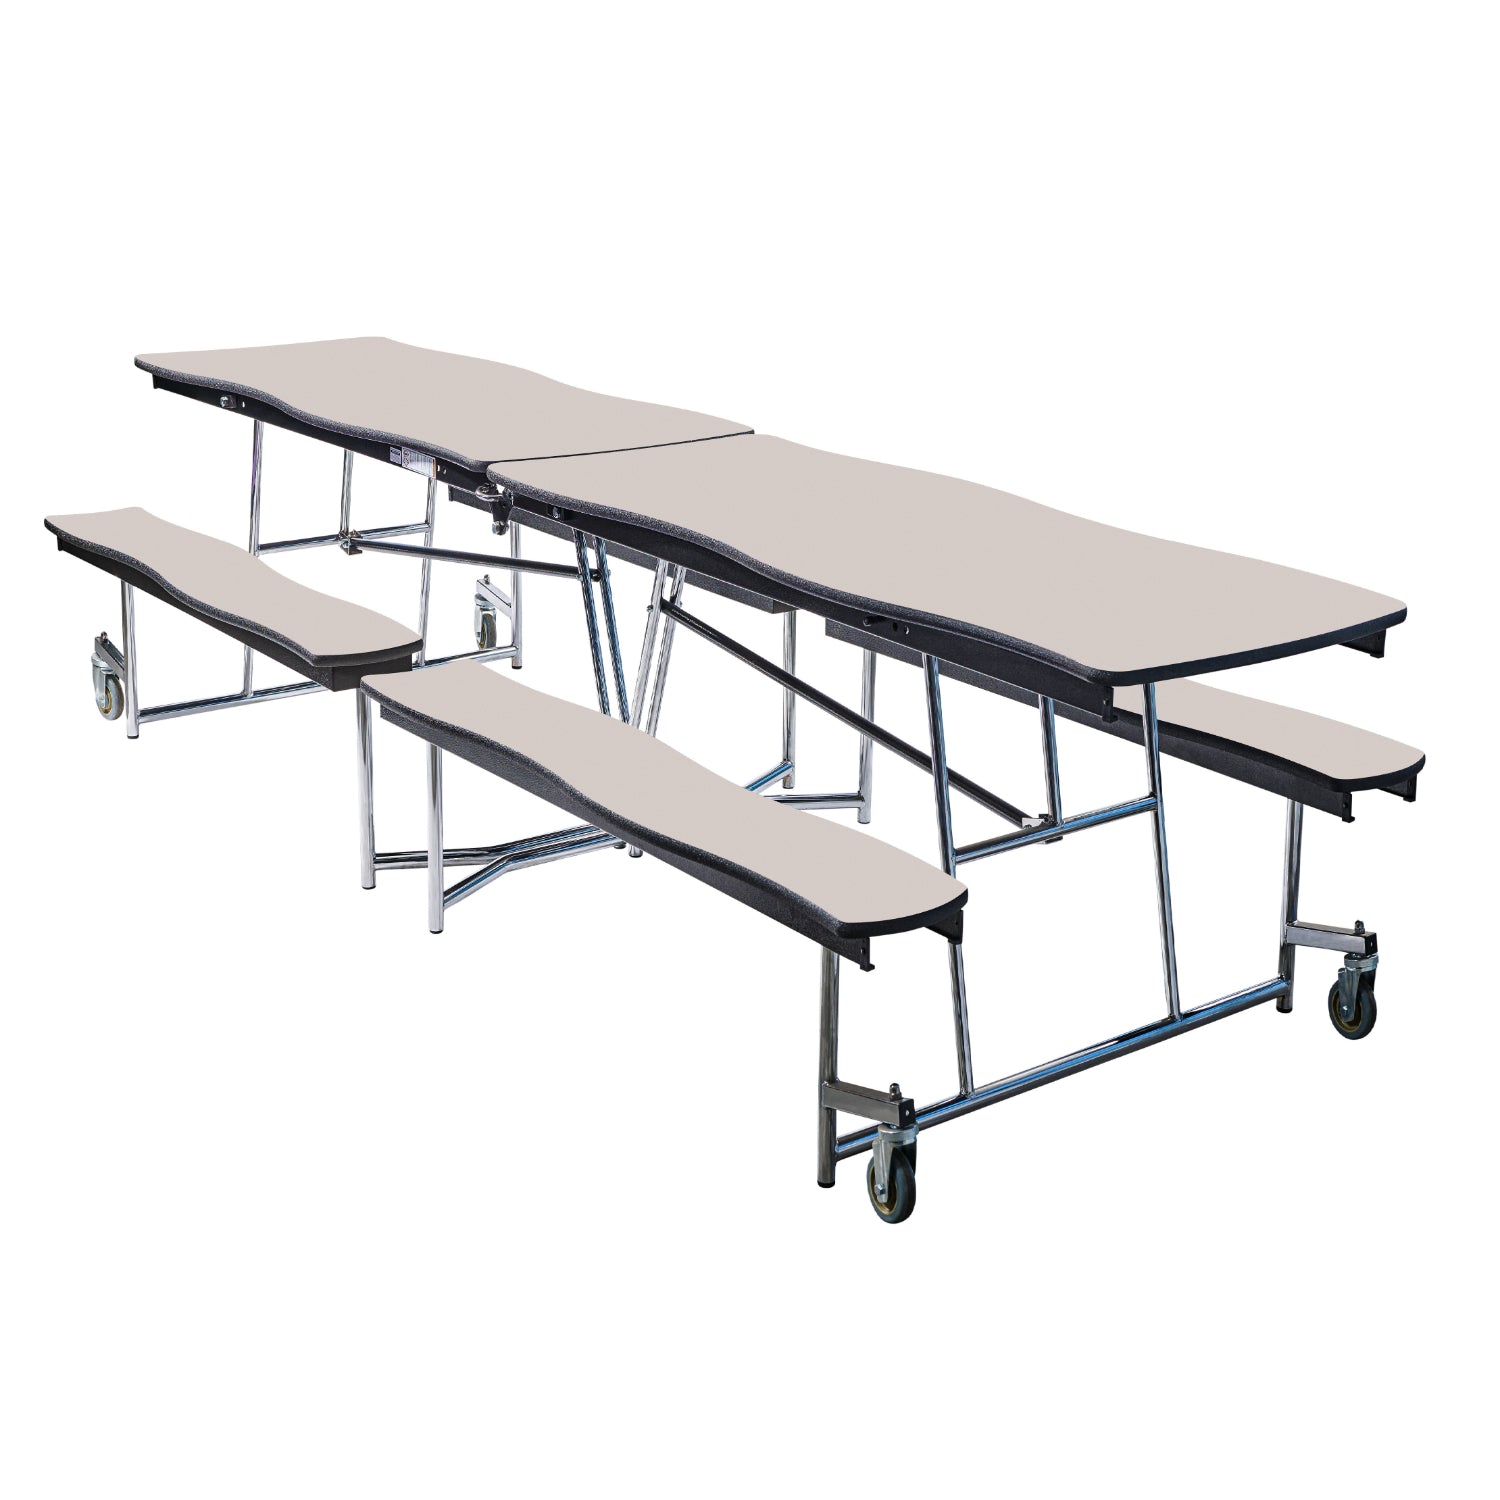 Mobile Cafeteria Table with Benches, 8' Swerve, Plywood Core, Vinyl T-Mold Edge, Chrome Frame